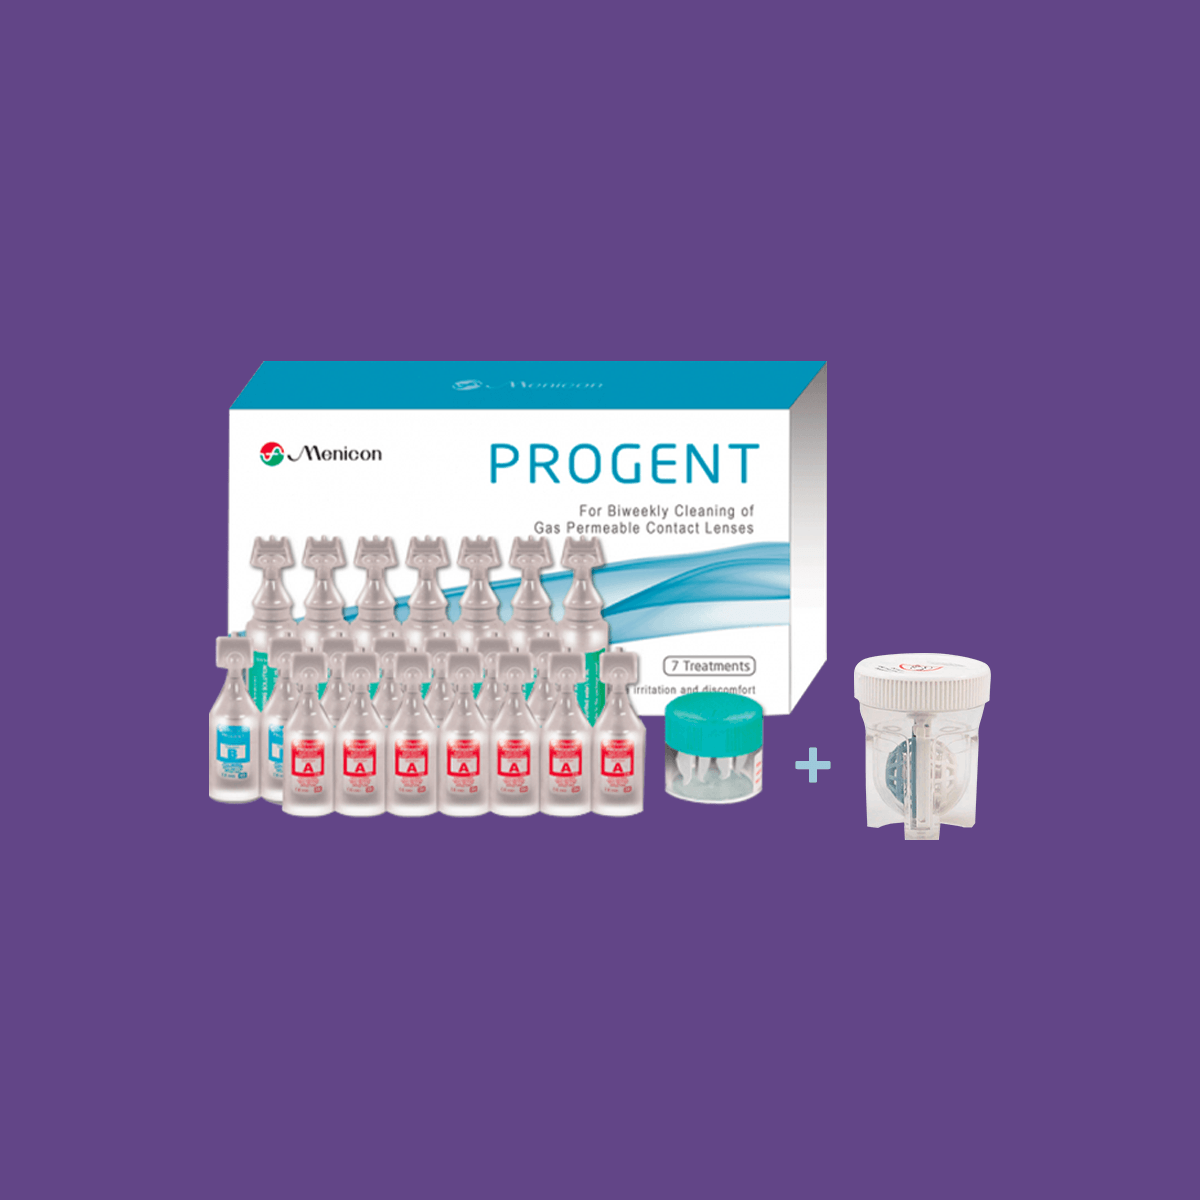 Menicon Progent Biweekly Contact Lens Cleaner - Removes Protein Deposits (7 Treatments) with Large Diameter Case Bundle - Dryeye Rescue